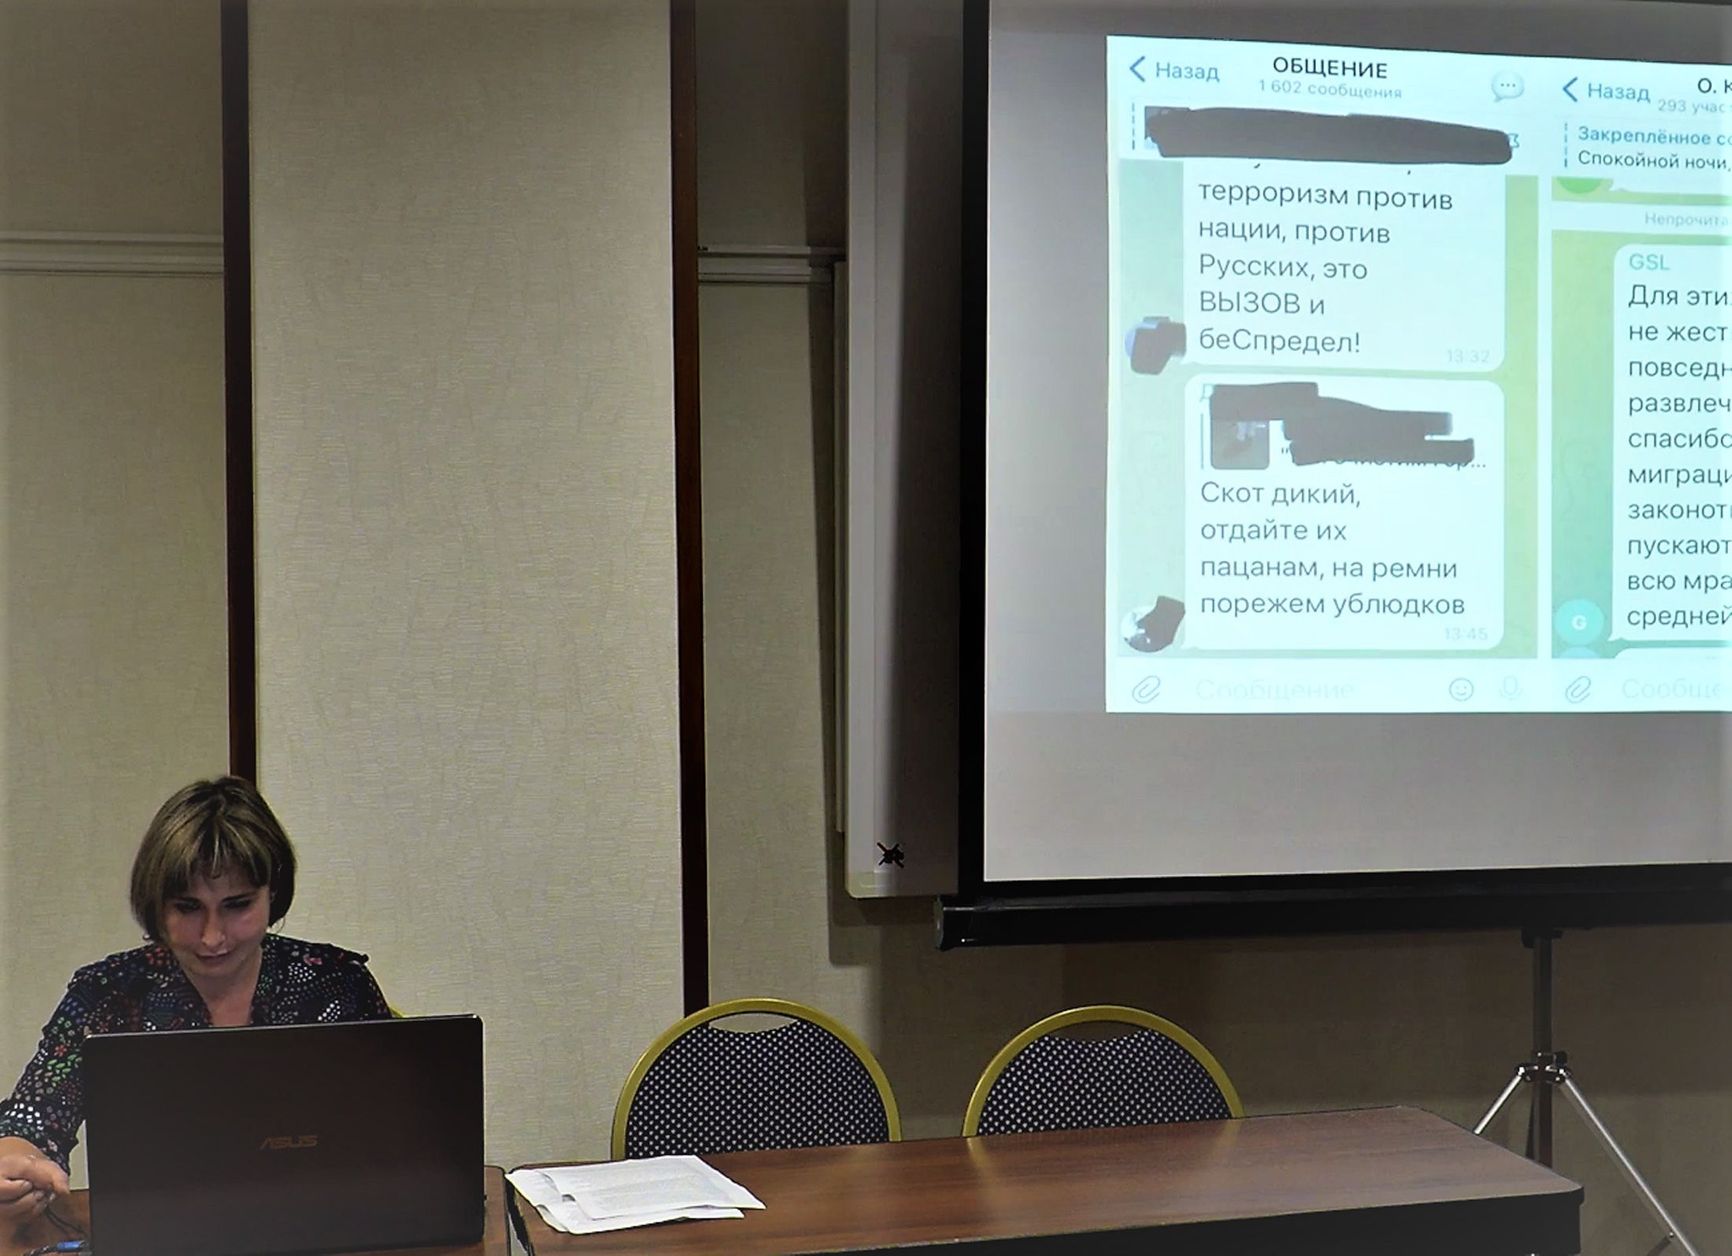 Lawyer Larisa Margorina showing an example of a radical statement in a chat at a lecture for Russian Community nationalists